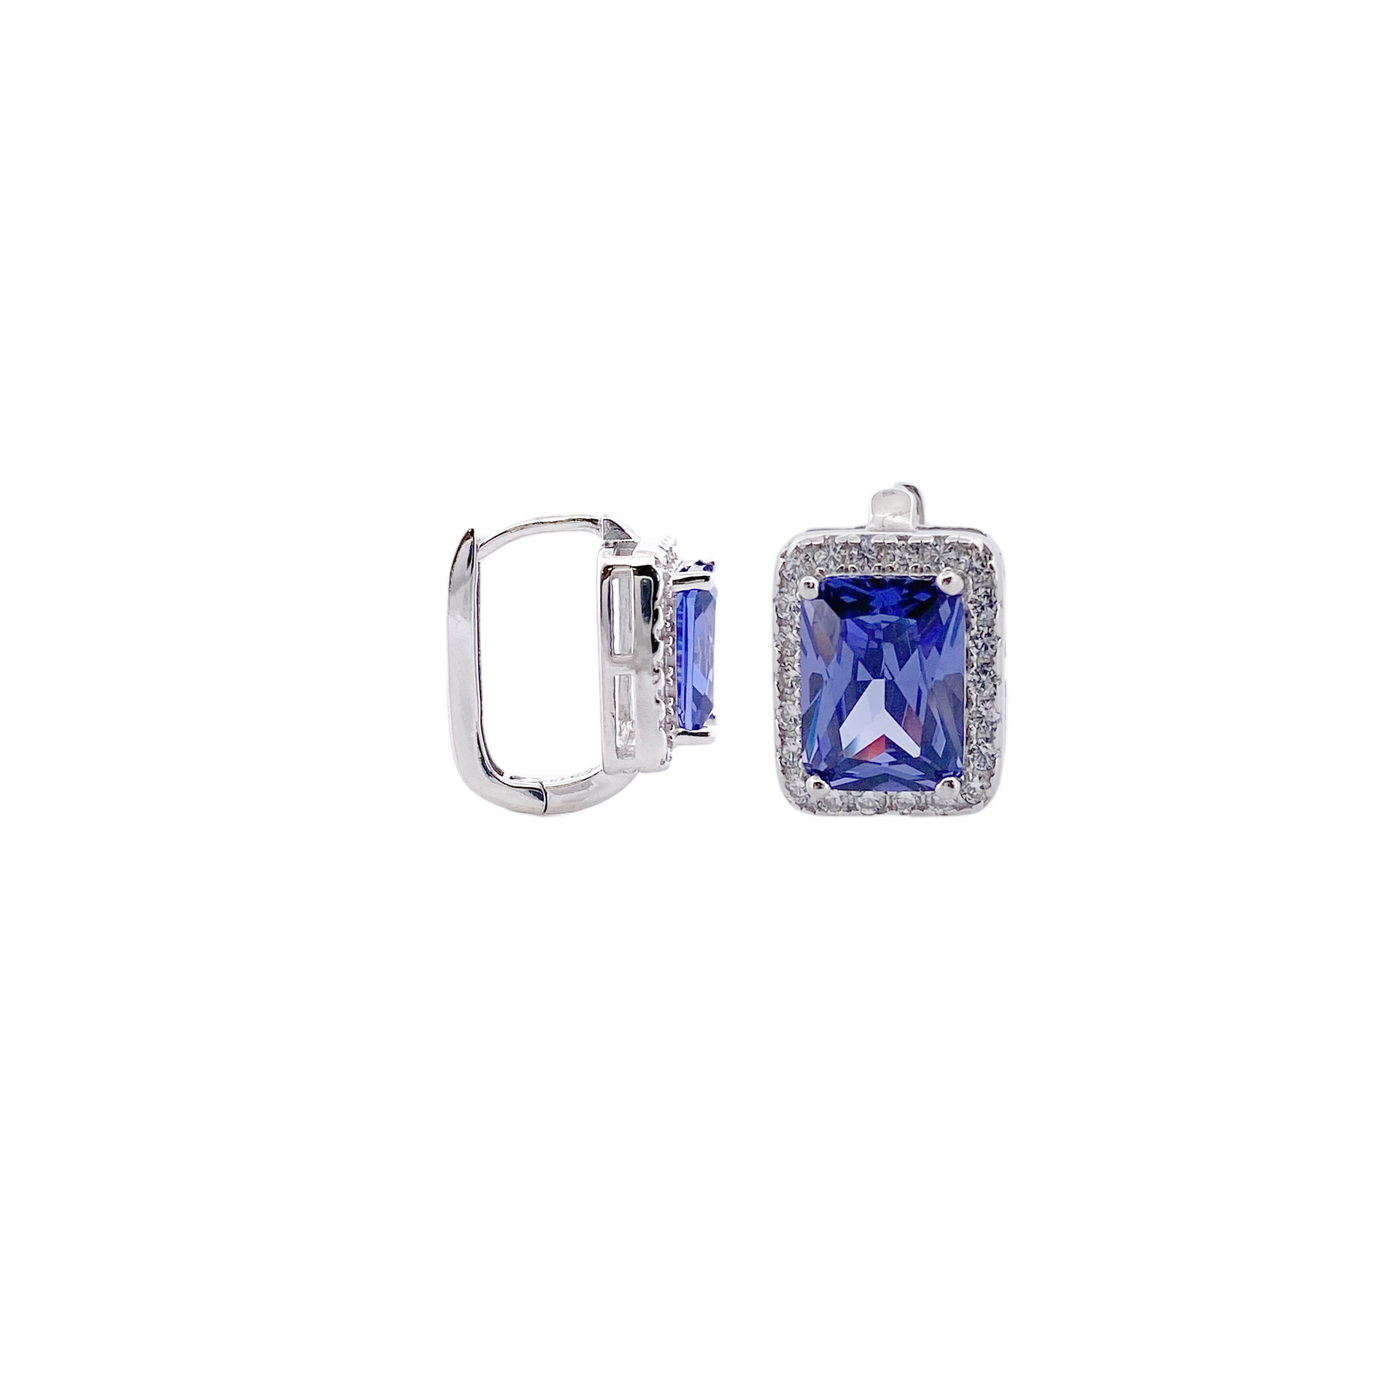 SILVER EARRINGS WITH OCTAGONAL STONE AND CZ